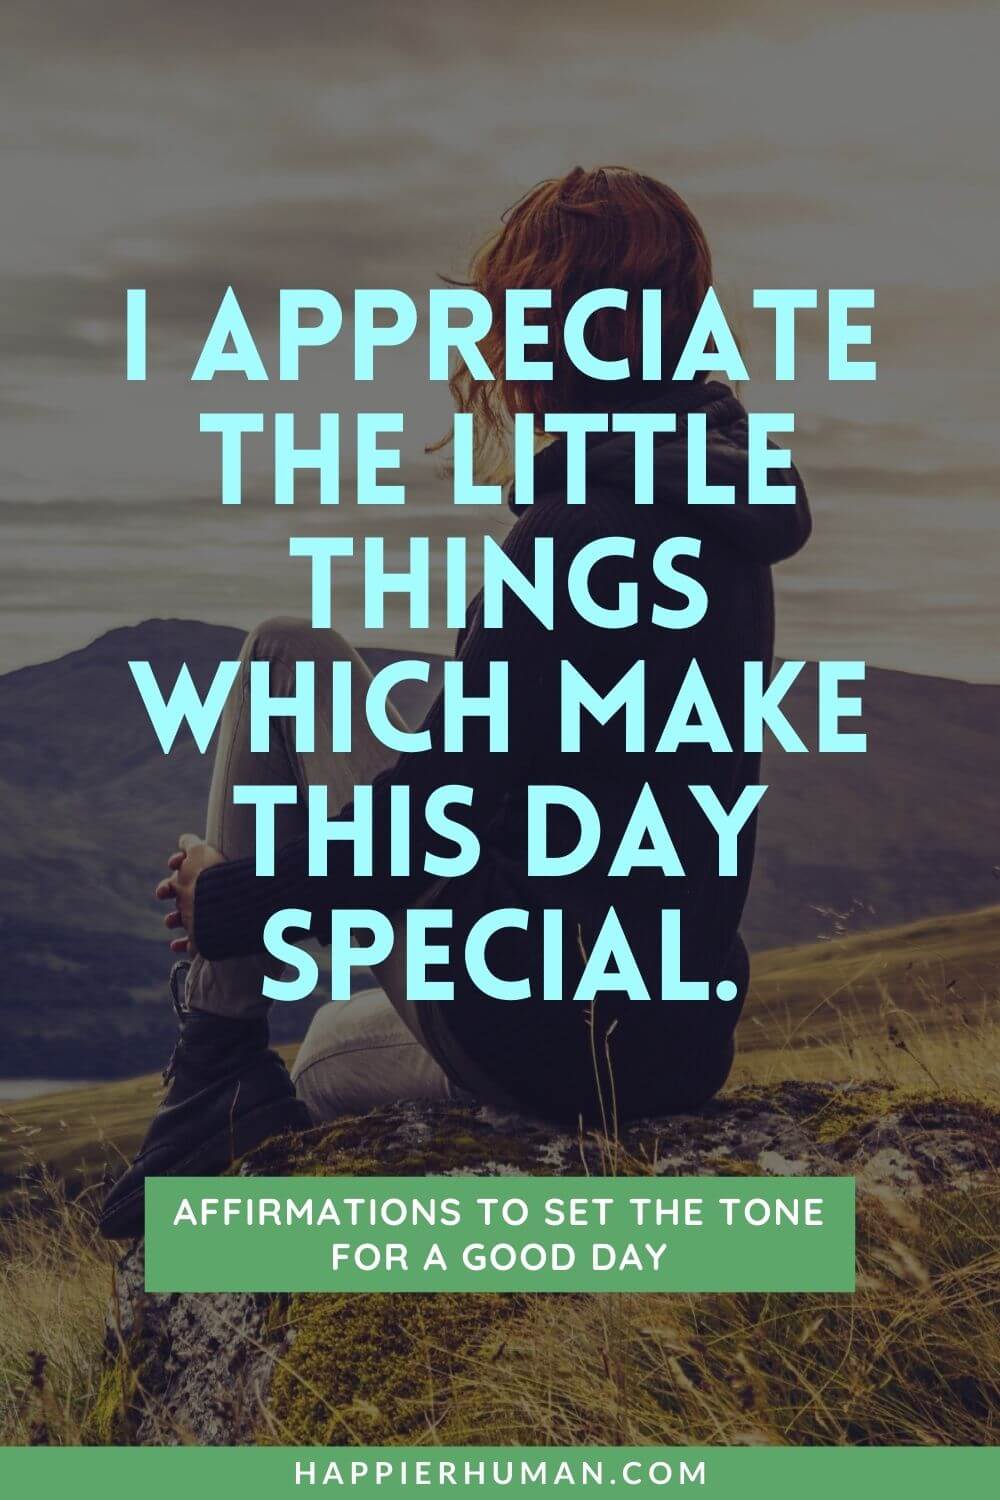 Affirmations for a Good Day - I appreciate the little things which make this day special. | affirmations for a good day at work | powerful affirmations | morning affirmations for friends